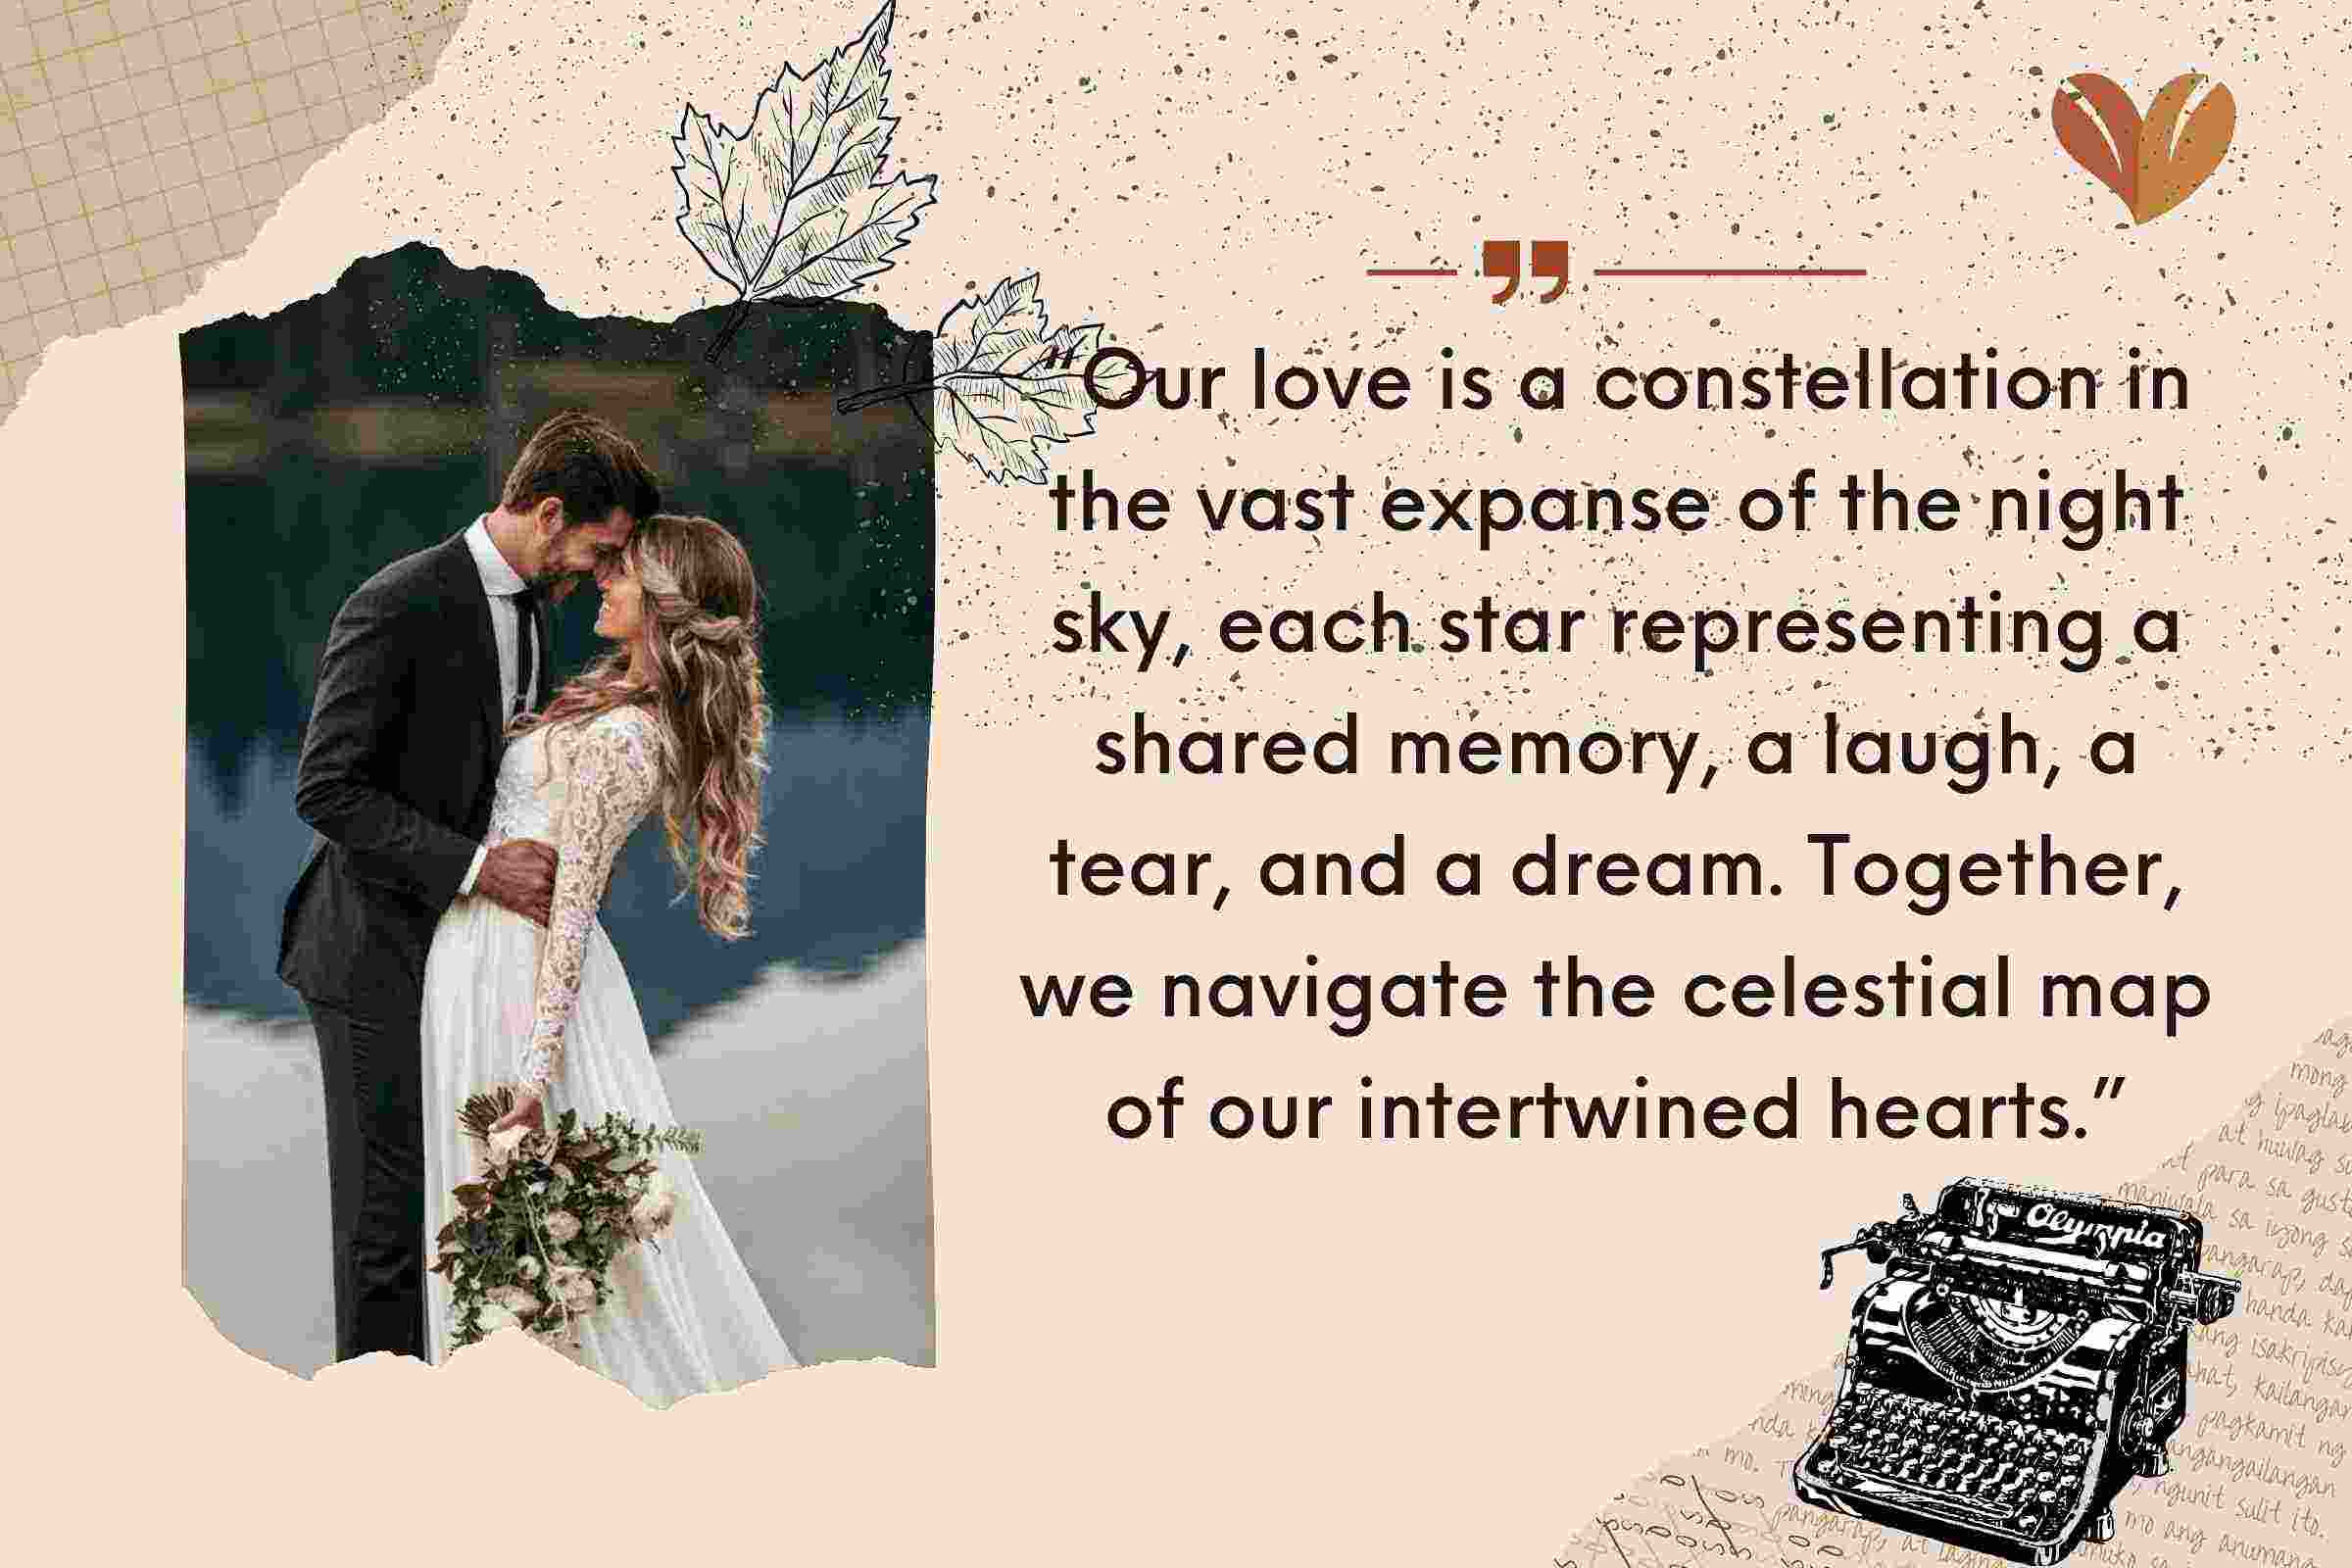 “Our love is a constellation in the vast expanse of the night sky, each star representing a shared memory, a laugh, a tear, and a dream. Together, we navigate the celestial map of our intertwined hearts.”